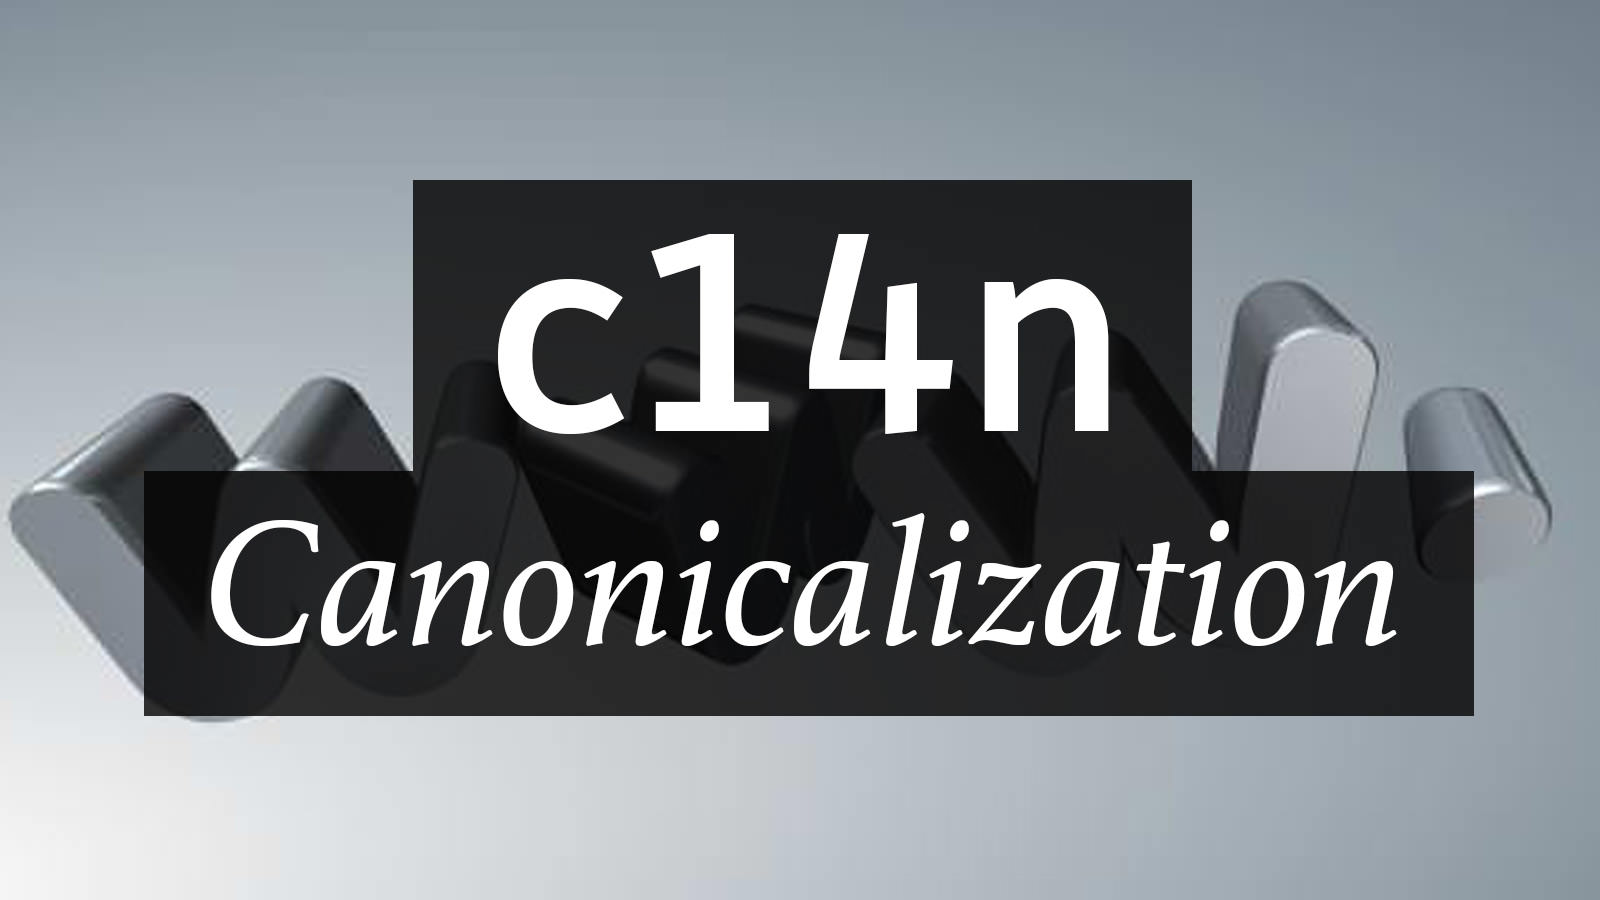 Numeronym for Canonicalization